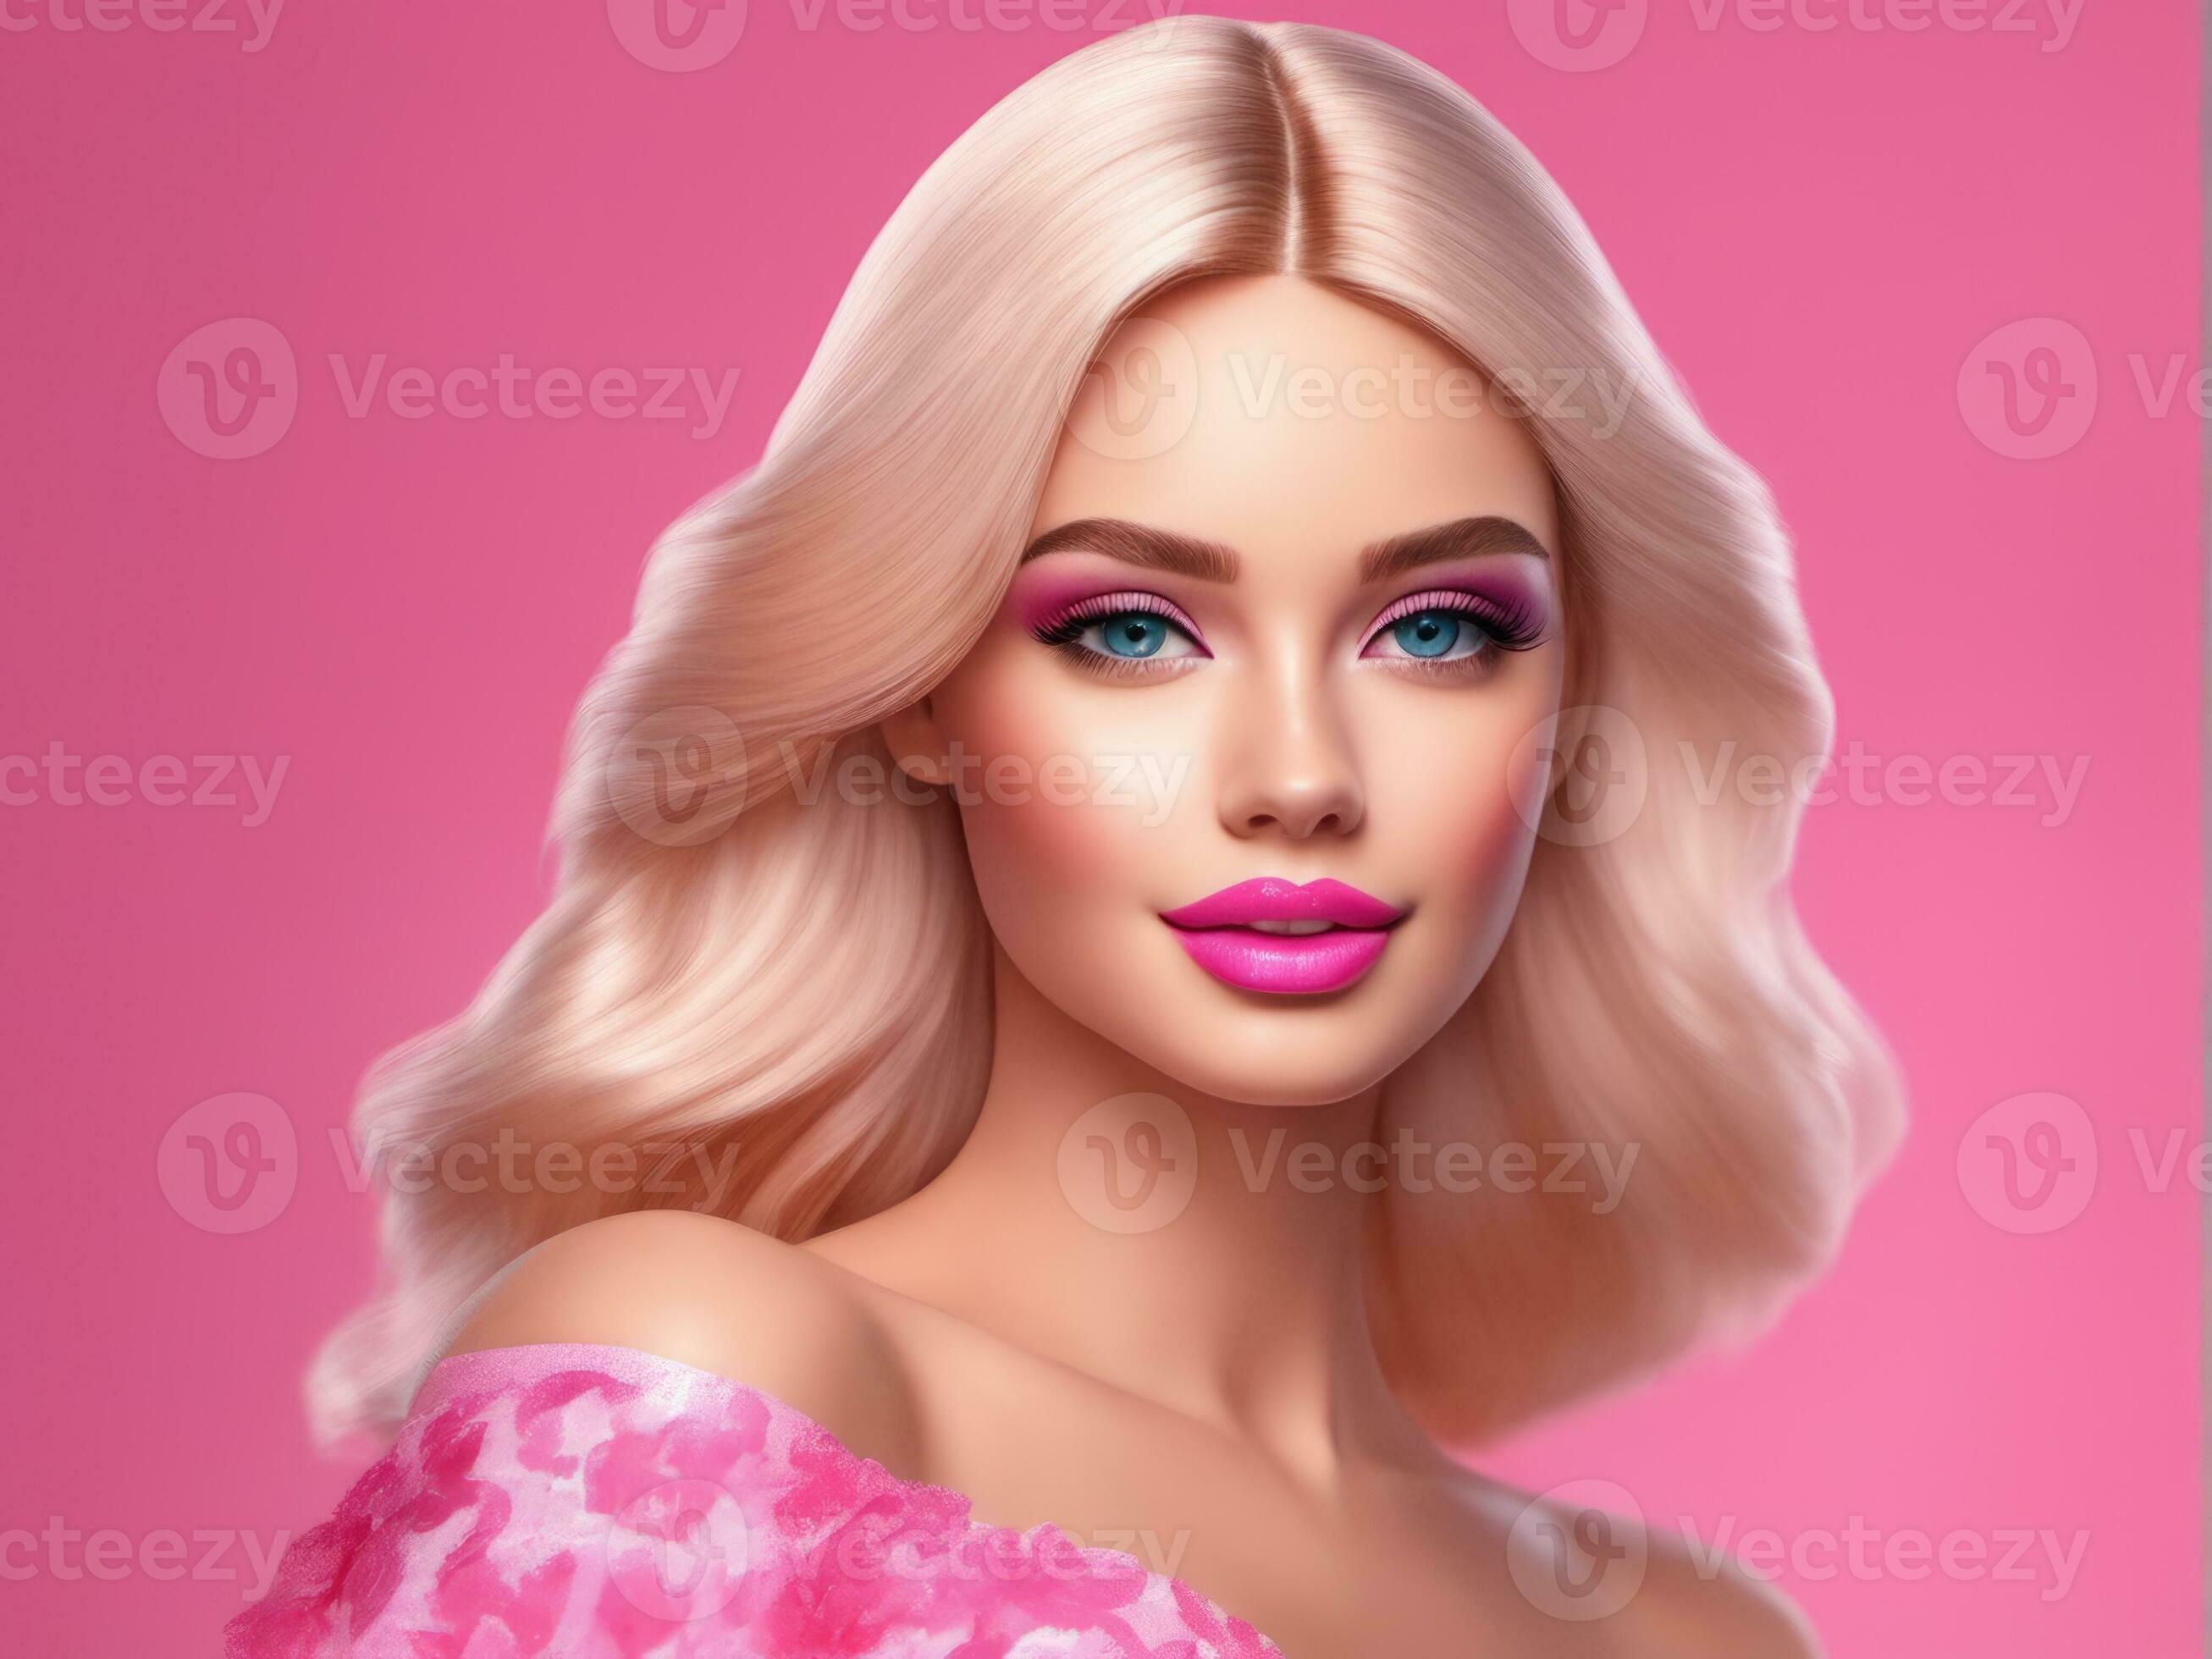 Young Pretty Blonde Real Woman With Hairstyle Close Up And Makeup On Pink  Background Smiling, Stylish Fashion Look Like Baby Doll Stock Photo,  Picture and Royalty Free Image. Image 118403725.